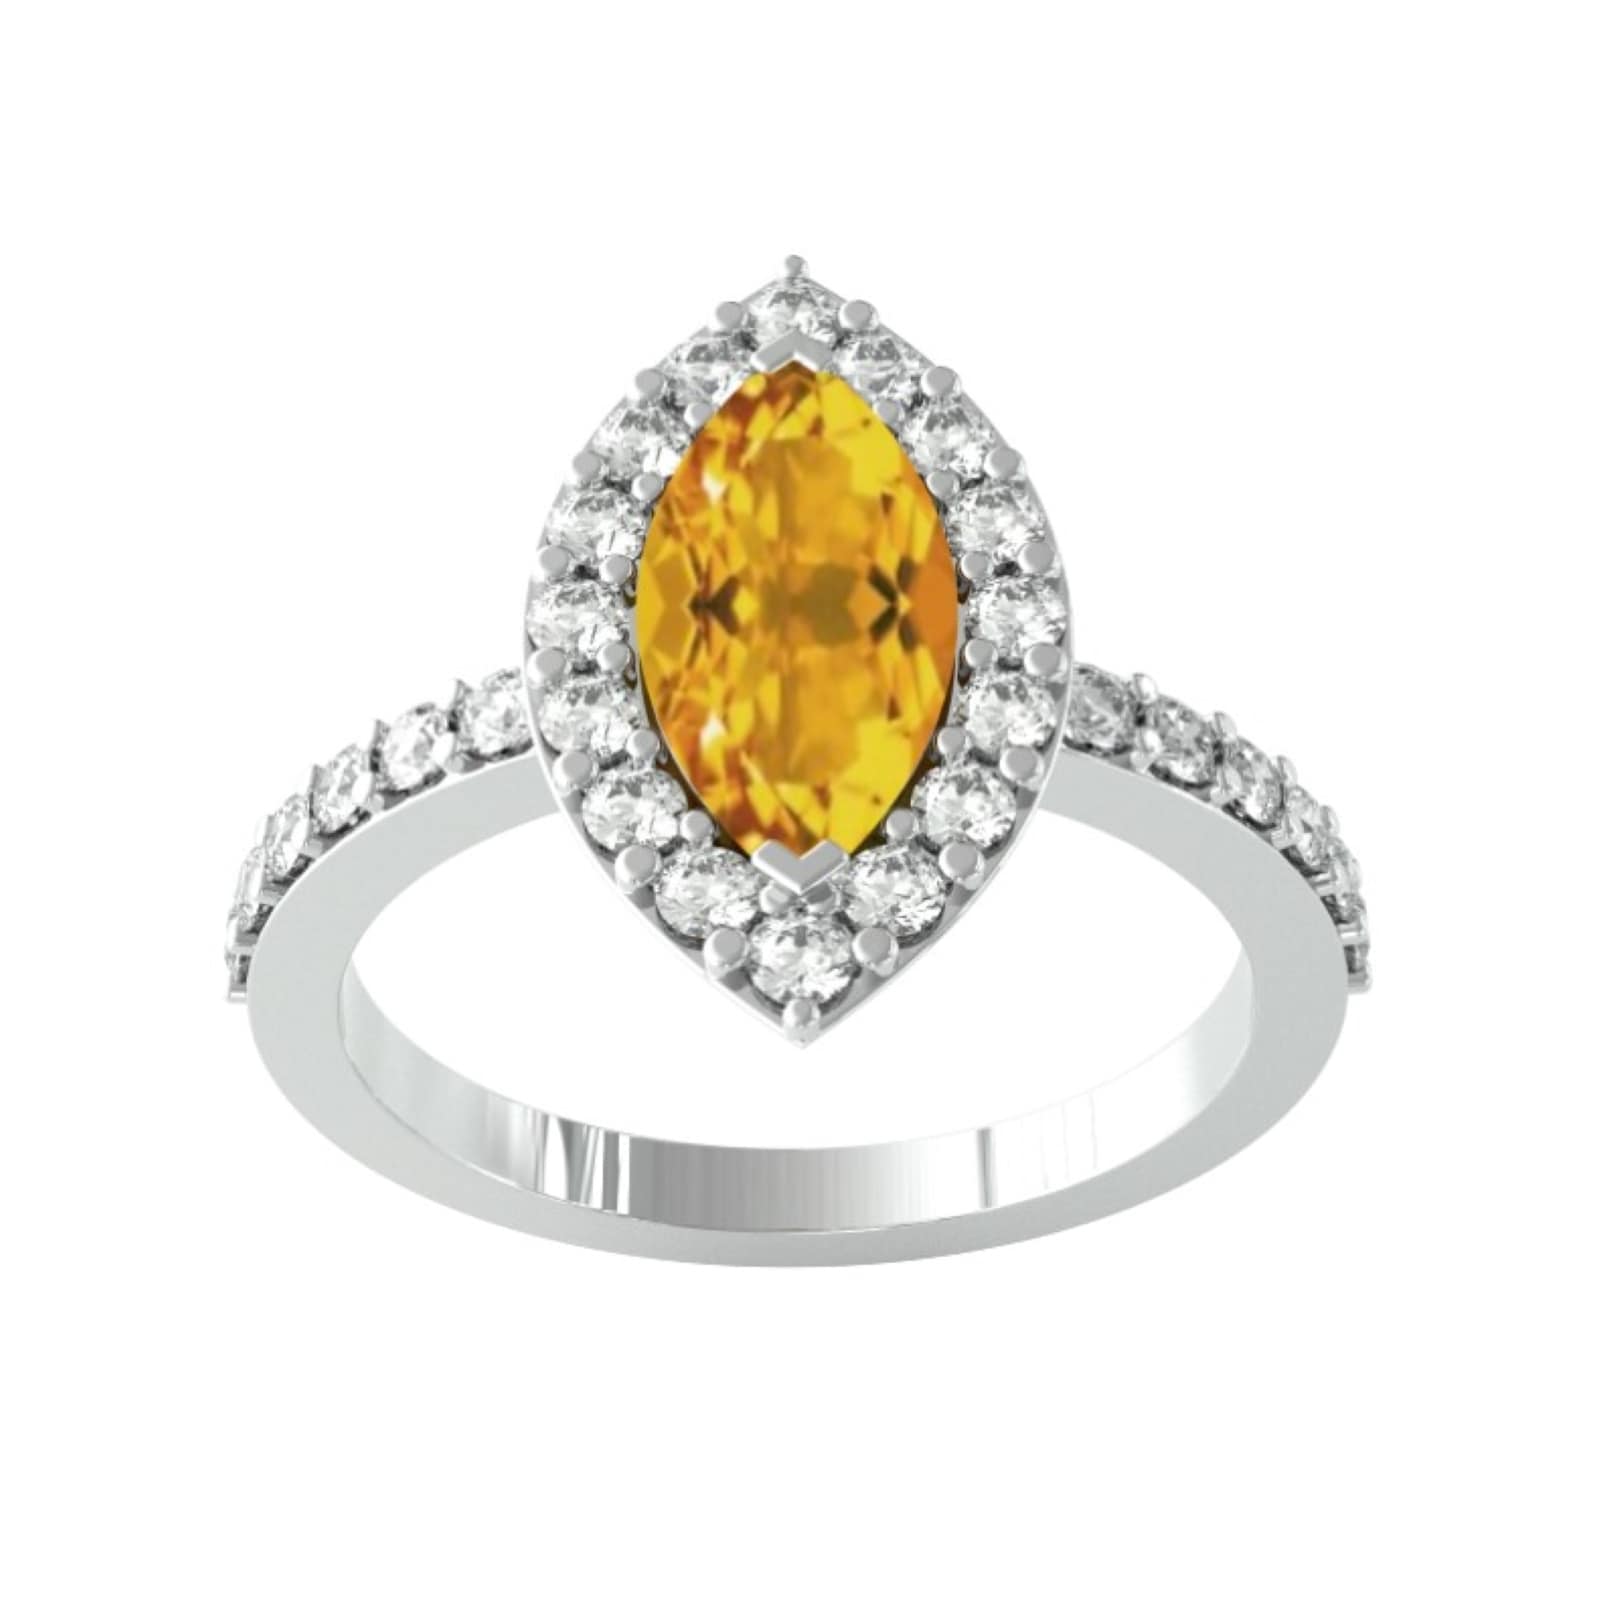 9ct White Gold Marquise Cut Citrine & Diamond Ring - Ring Size T.5